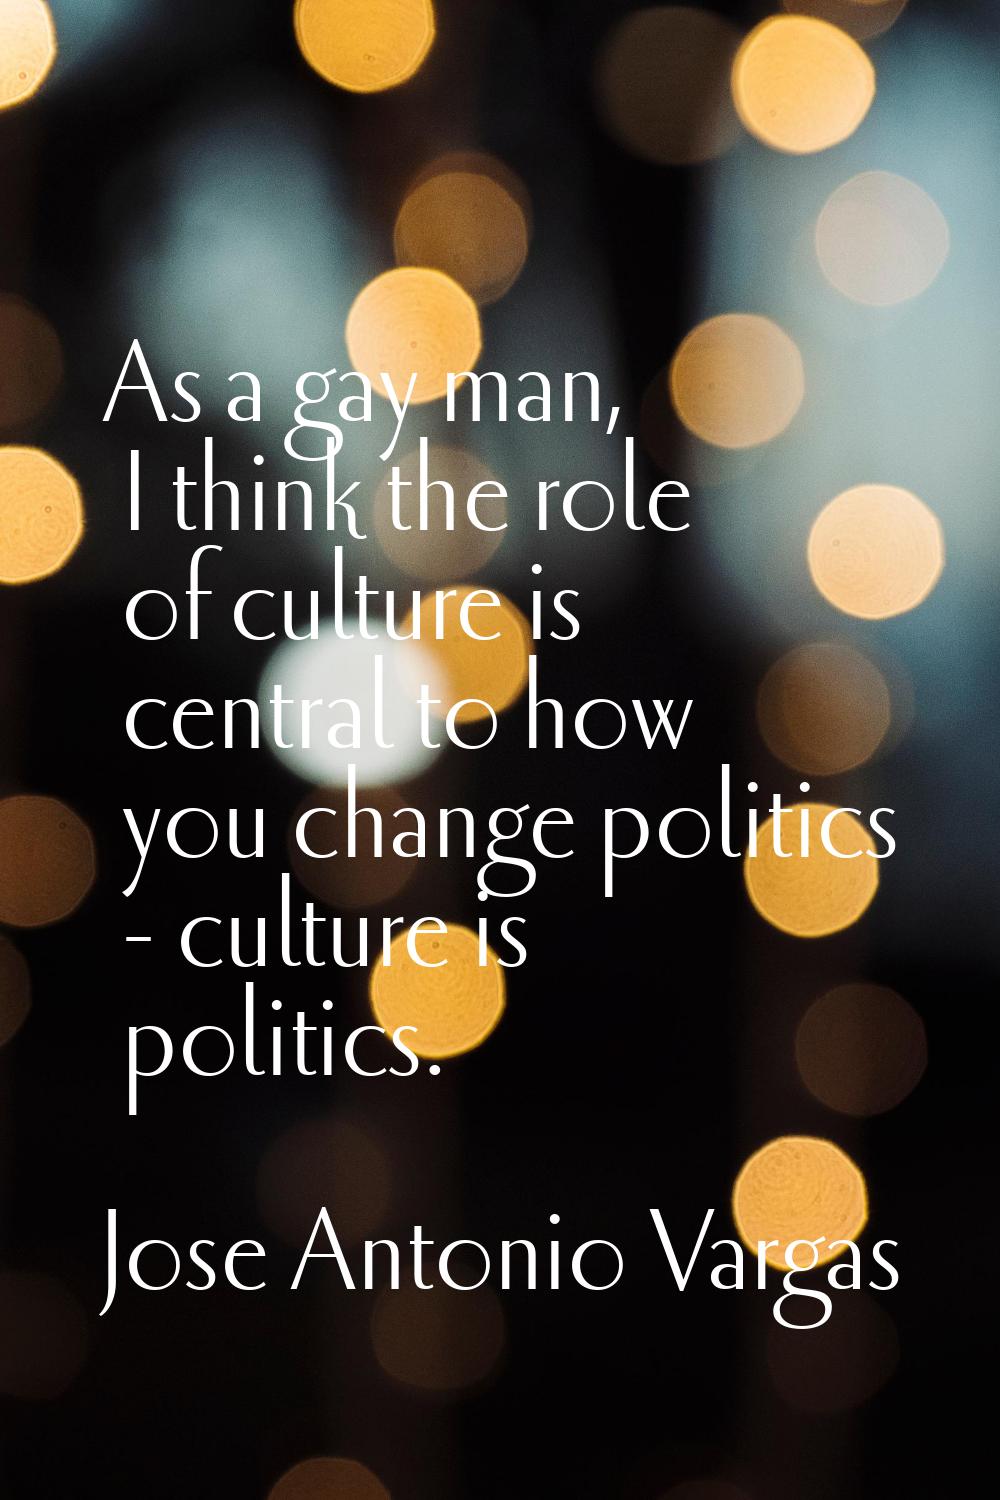 As a gay man, I think the role of culture is central to how you change politics - culture is politi